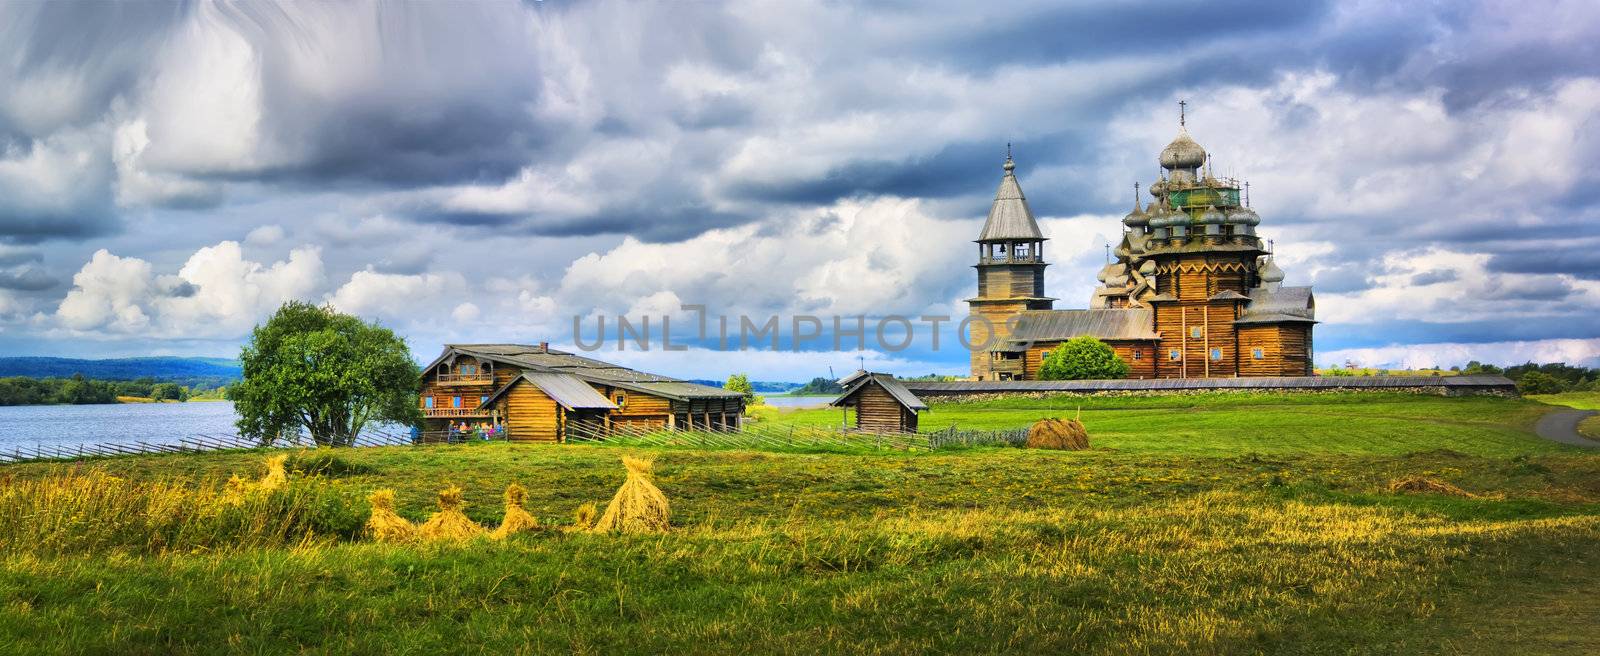 The wooden buildings of the ancient Russian architecture by oleg_zhukov